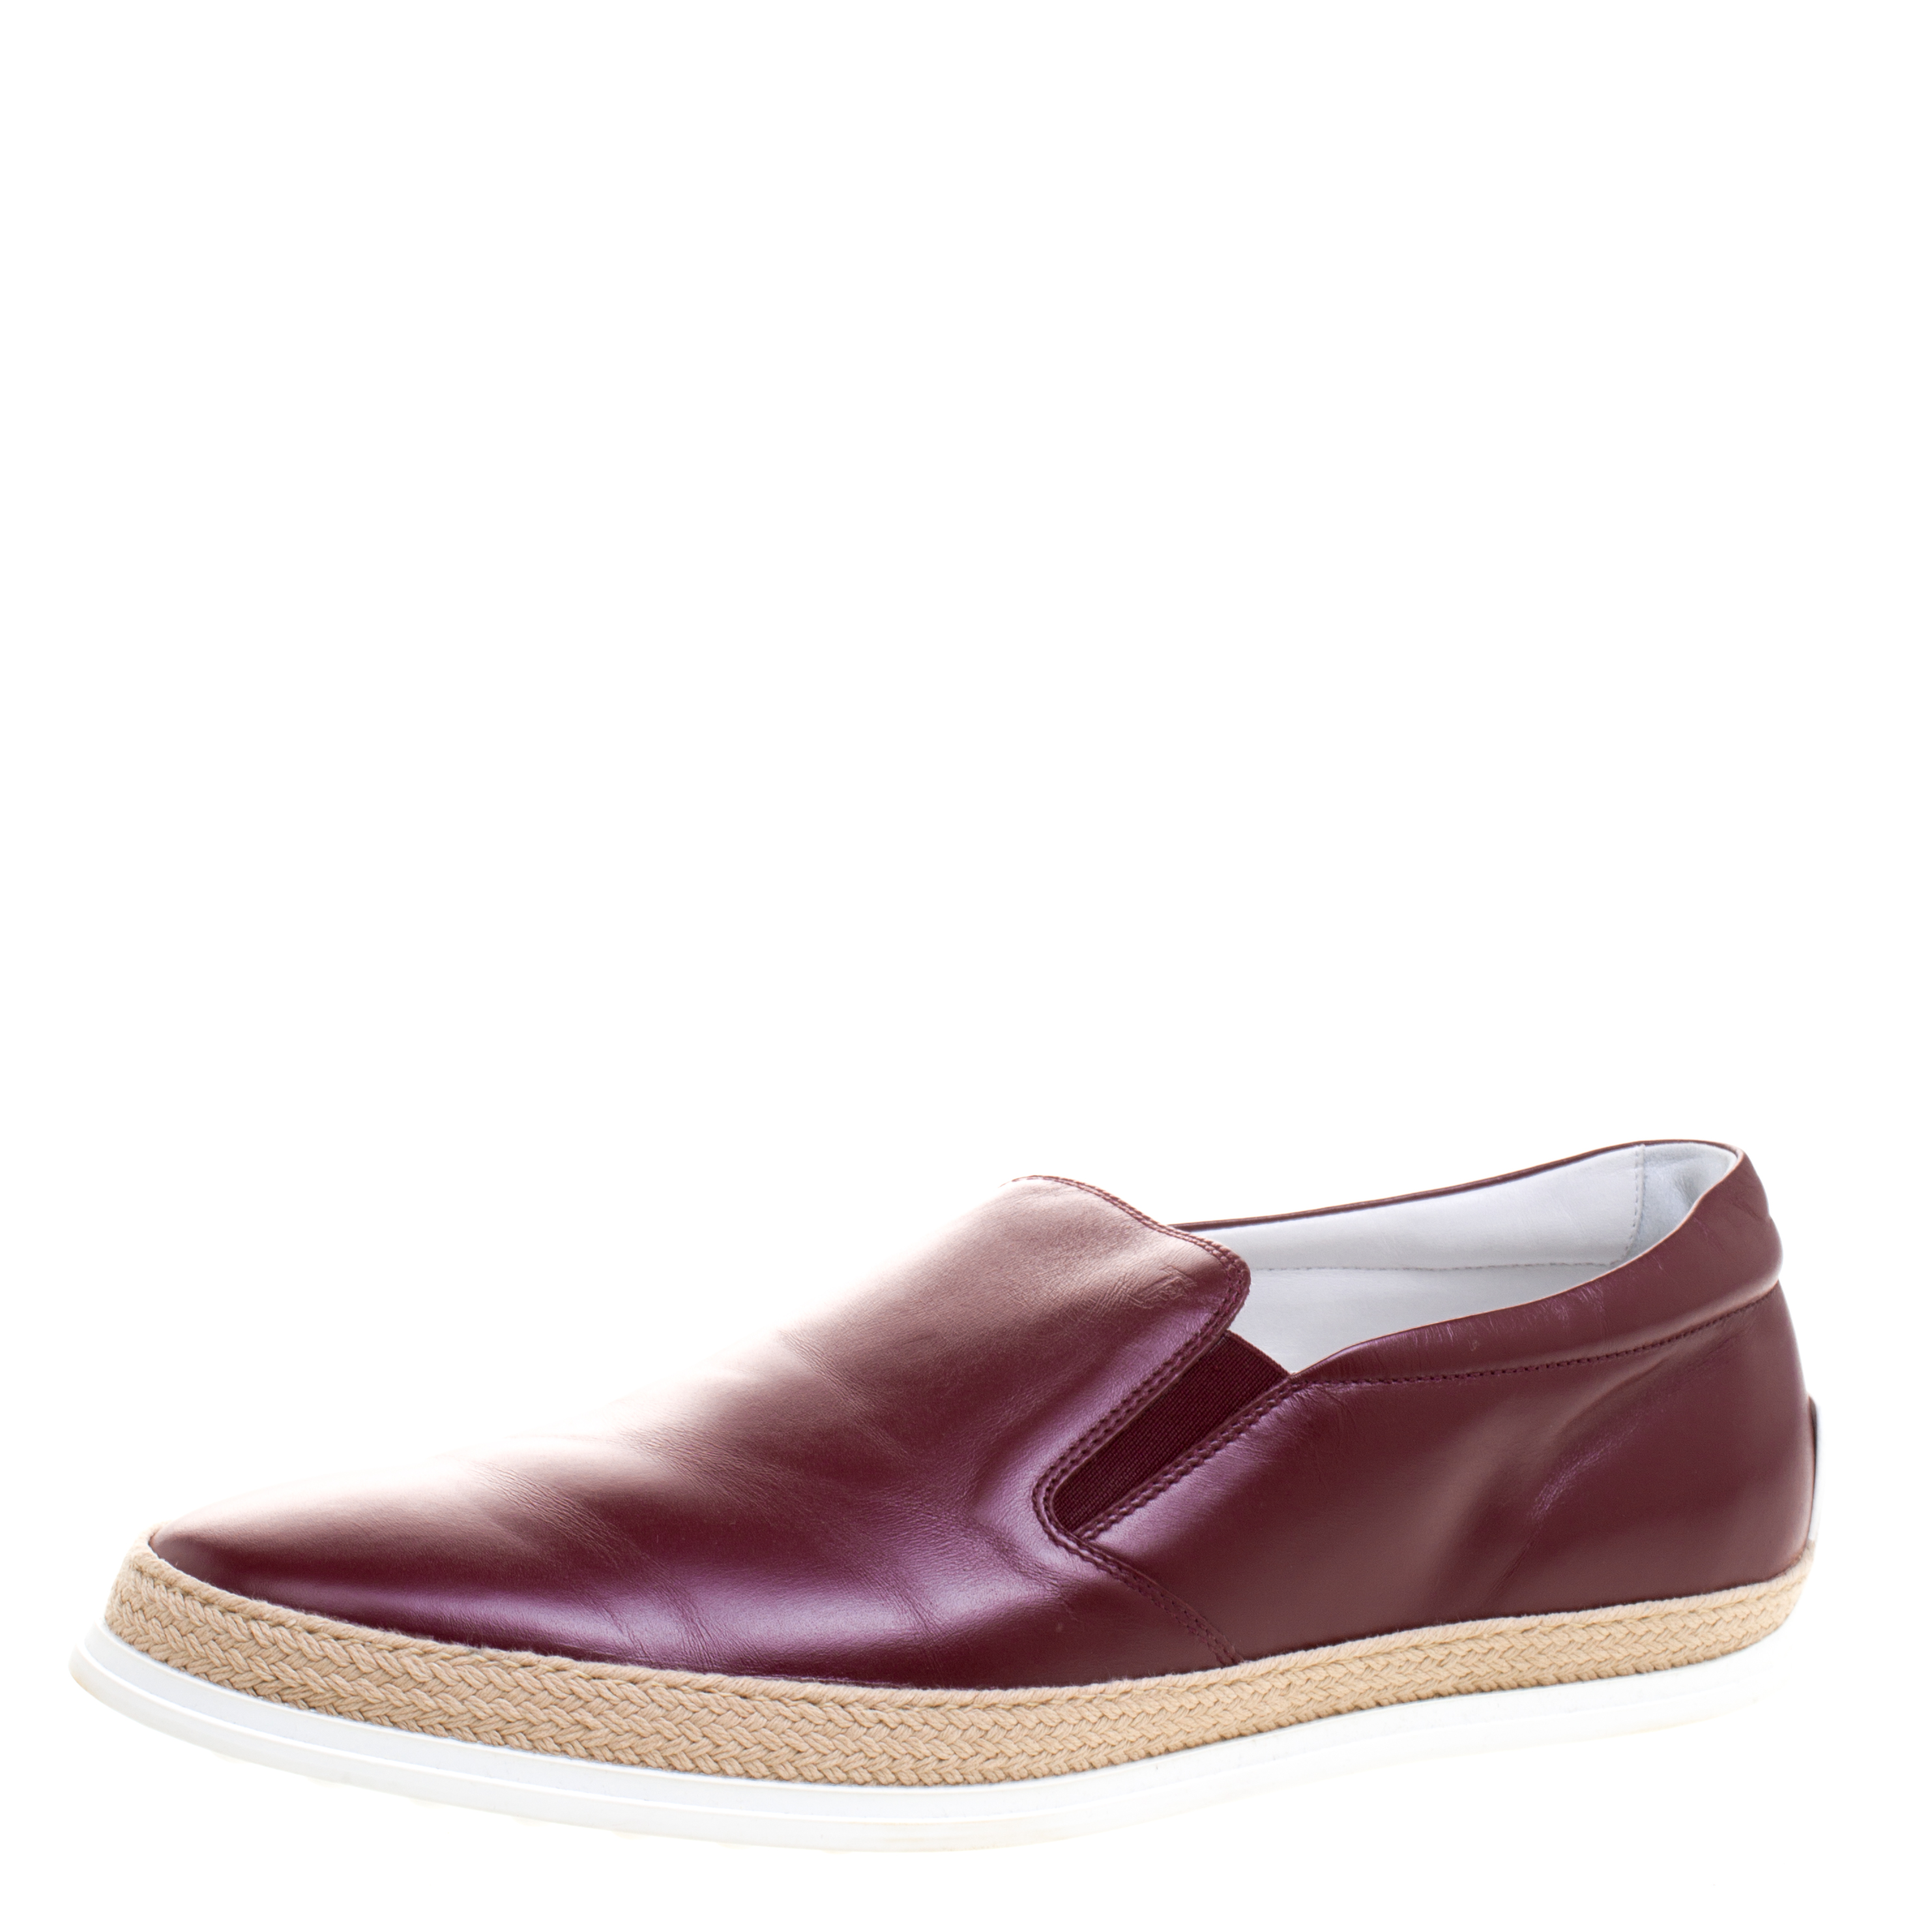 Tod's Burgundy Leather Espadrille Slip-On Sneakers Size 44.5